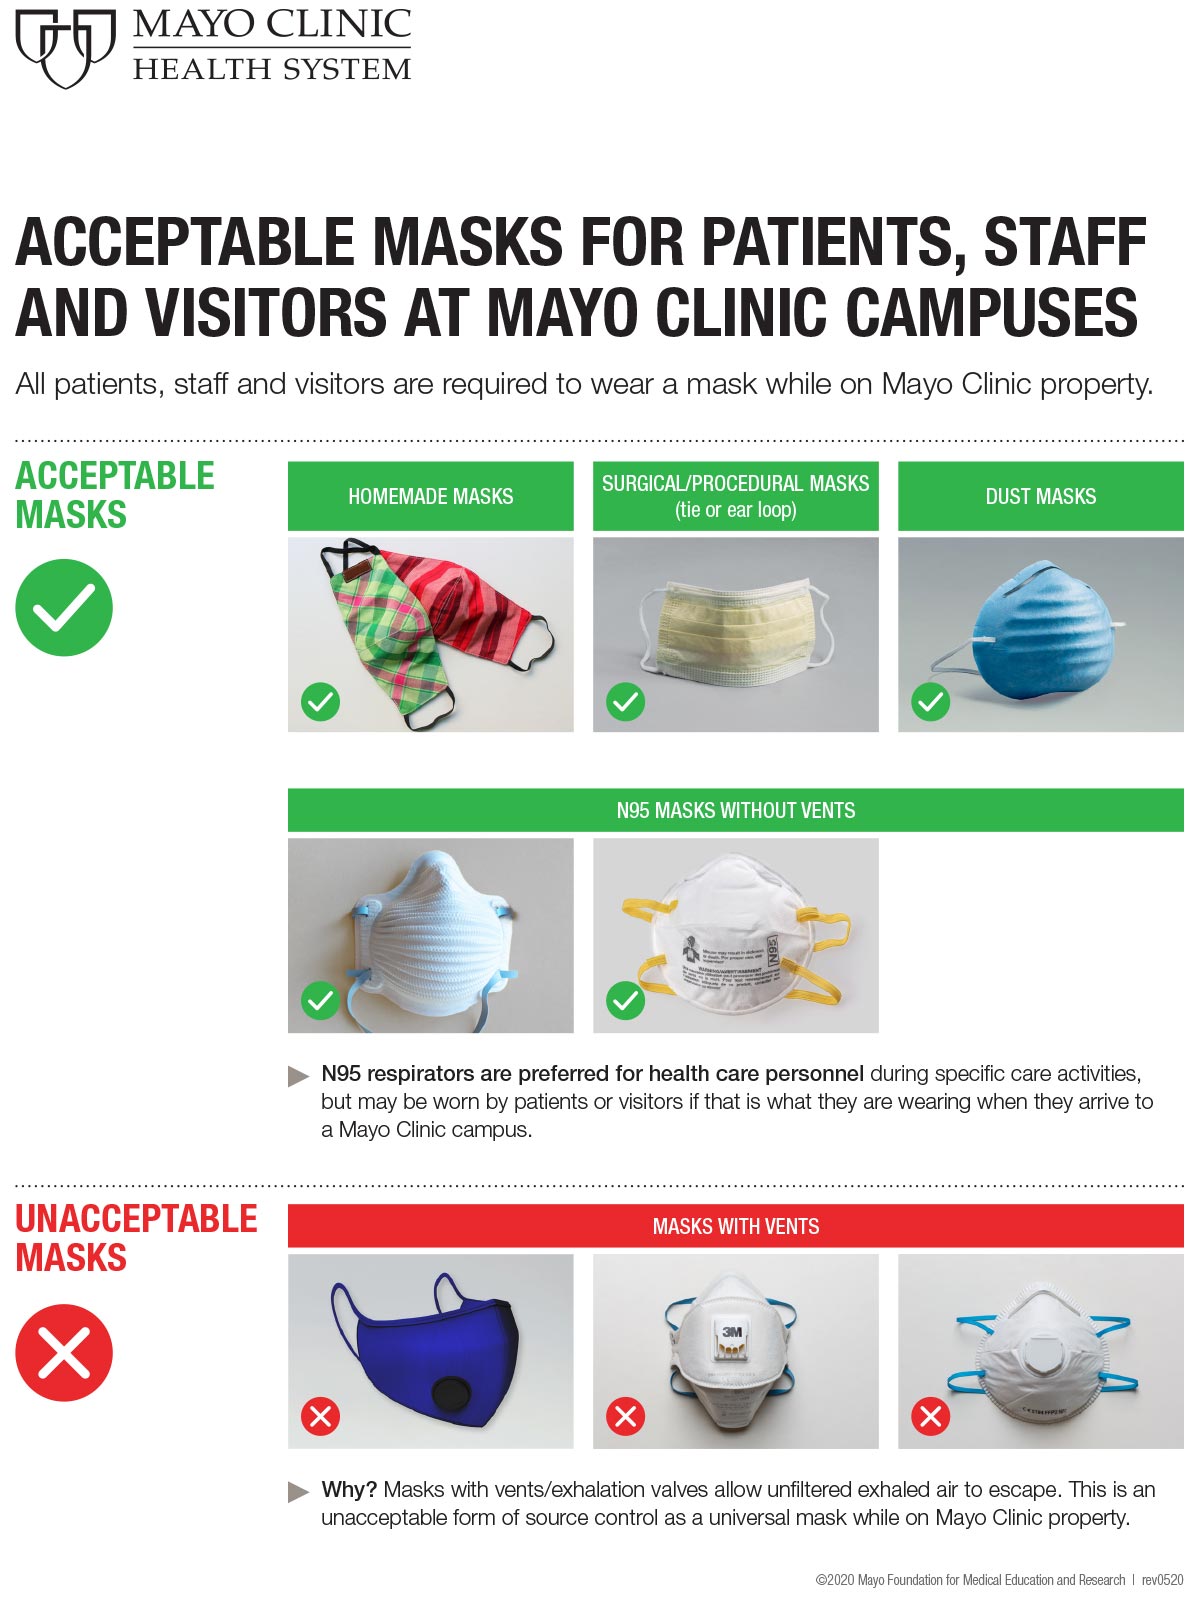 Mayo Clinic's guide to recommended masks